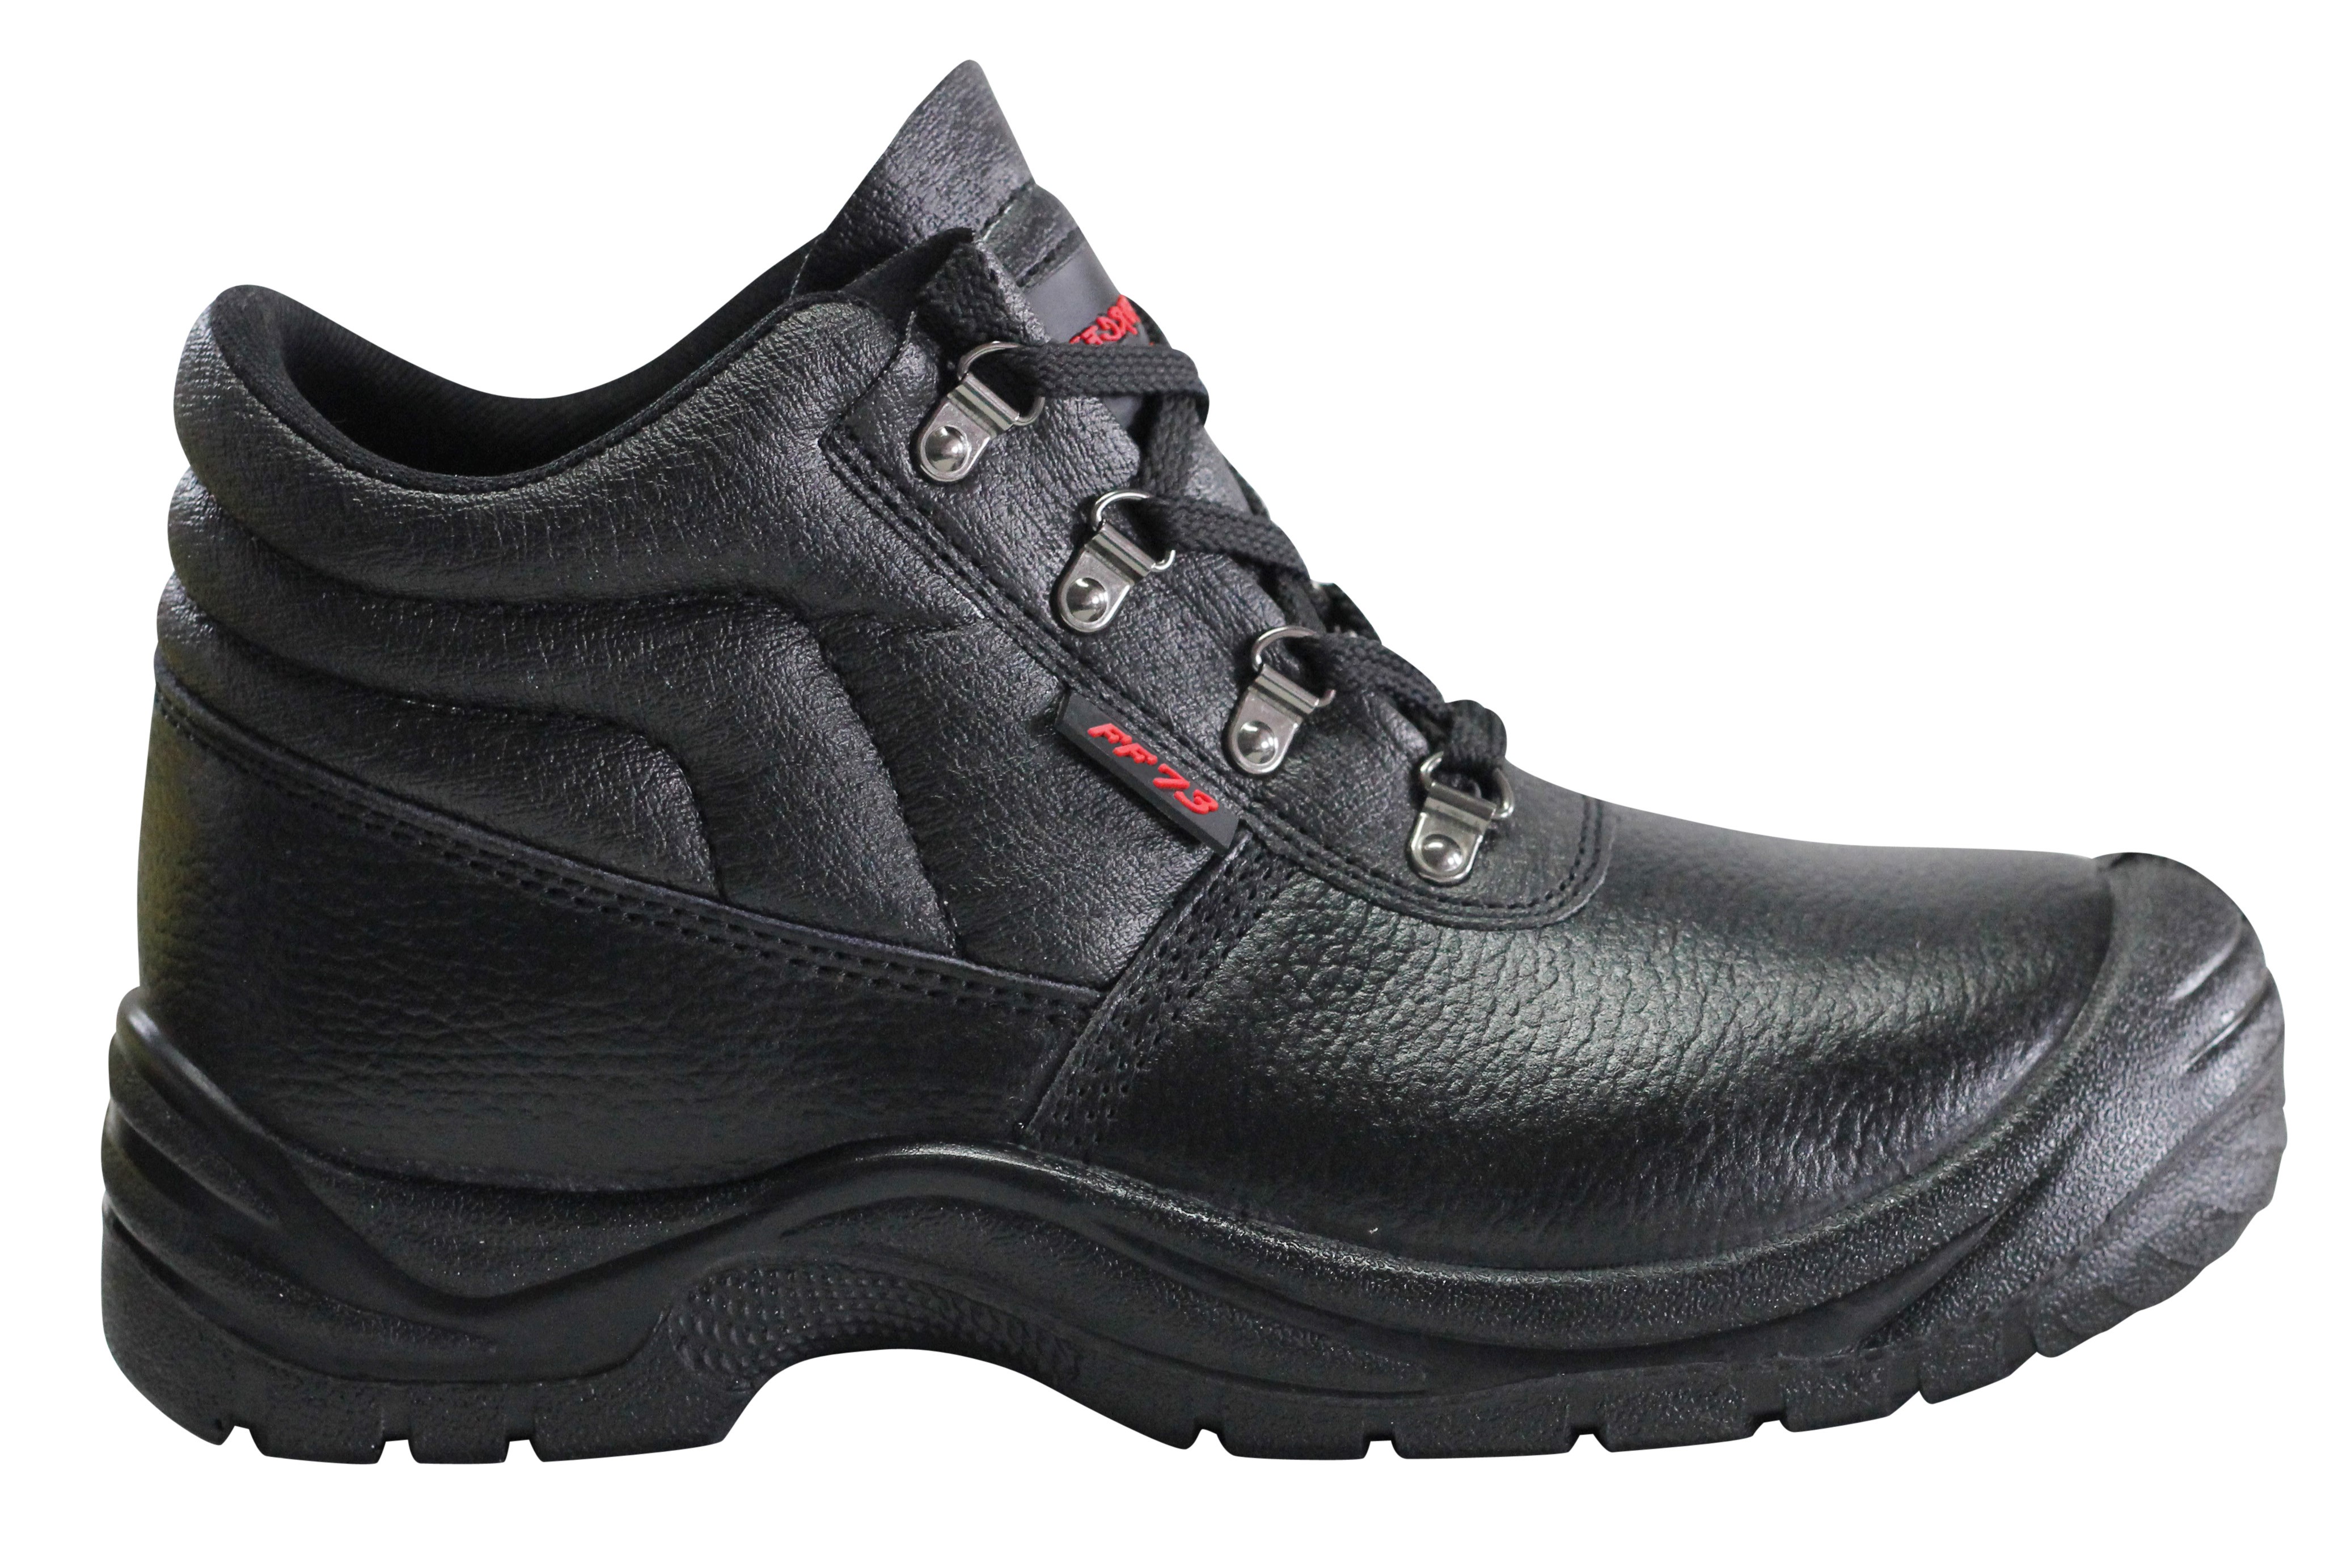 Foot force safety boots (nsp) safety footwear/shoes